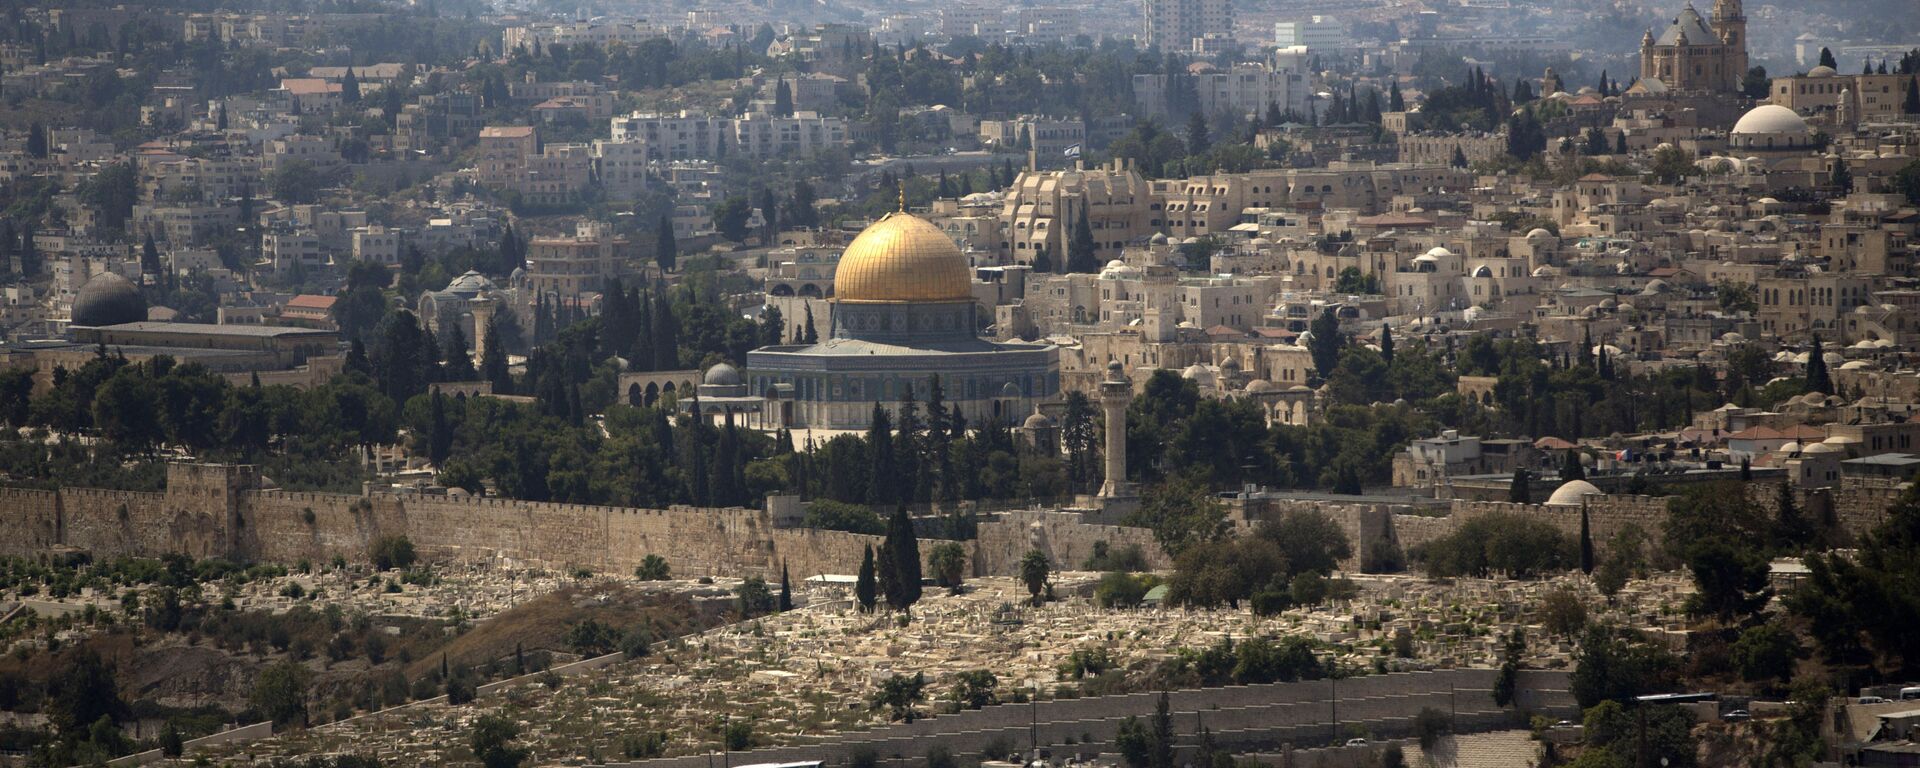 In this Monday, Sept. 9, 2013 file photo, the Dome of the Rock Mosque in the Al Aqsa Mosque compound, known by the Jews as the Temple Mount, is seen in Jerusalem's Old City. 2014 was supposed to be a record-breaking year for tourist visits to Israel. But all that changed when this summer’s 50-day war between Israel and Hamas prompted jittery travelers to cancel trips en masse. Merchants in Jerusalem’s Old City say the feel the sting. The area’s cobblestone streets are typically chock full of tourists visiting the holy sites within the storied walls. But they've been eerily empty over the summer. - Sputnik International, 1920, 28.01.2023